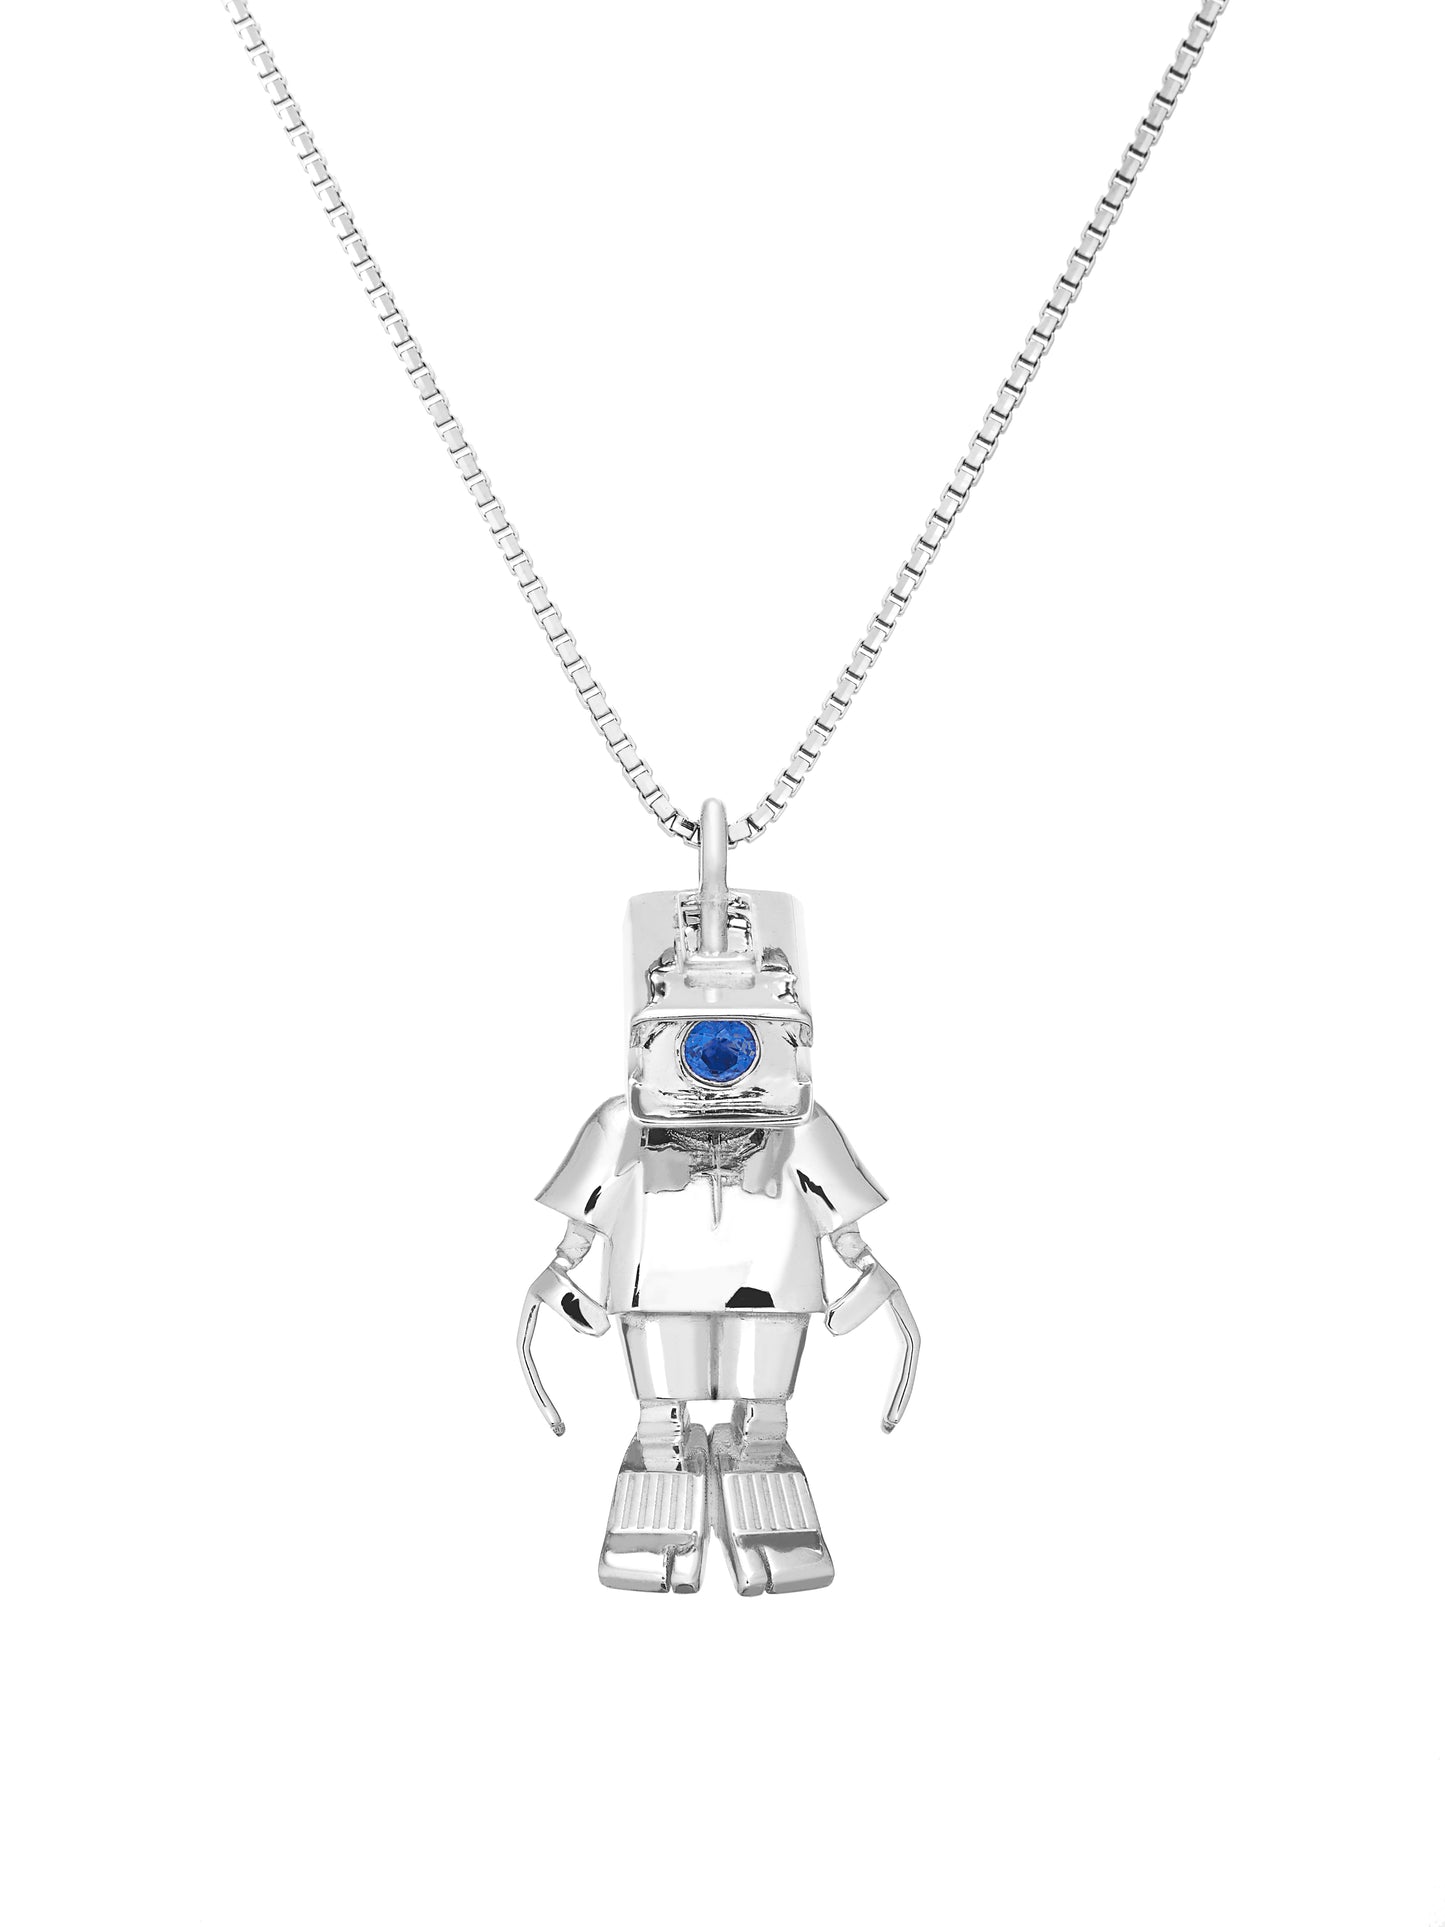 Robot Necklace - Large (Silver)